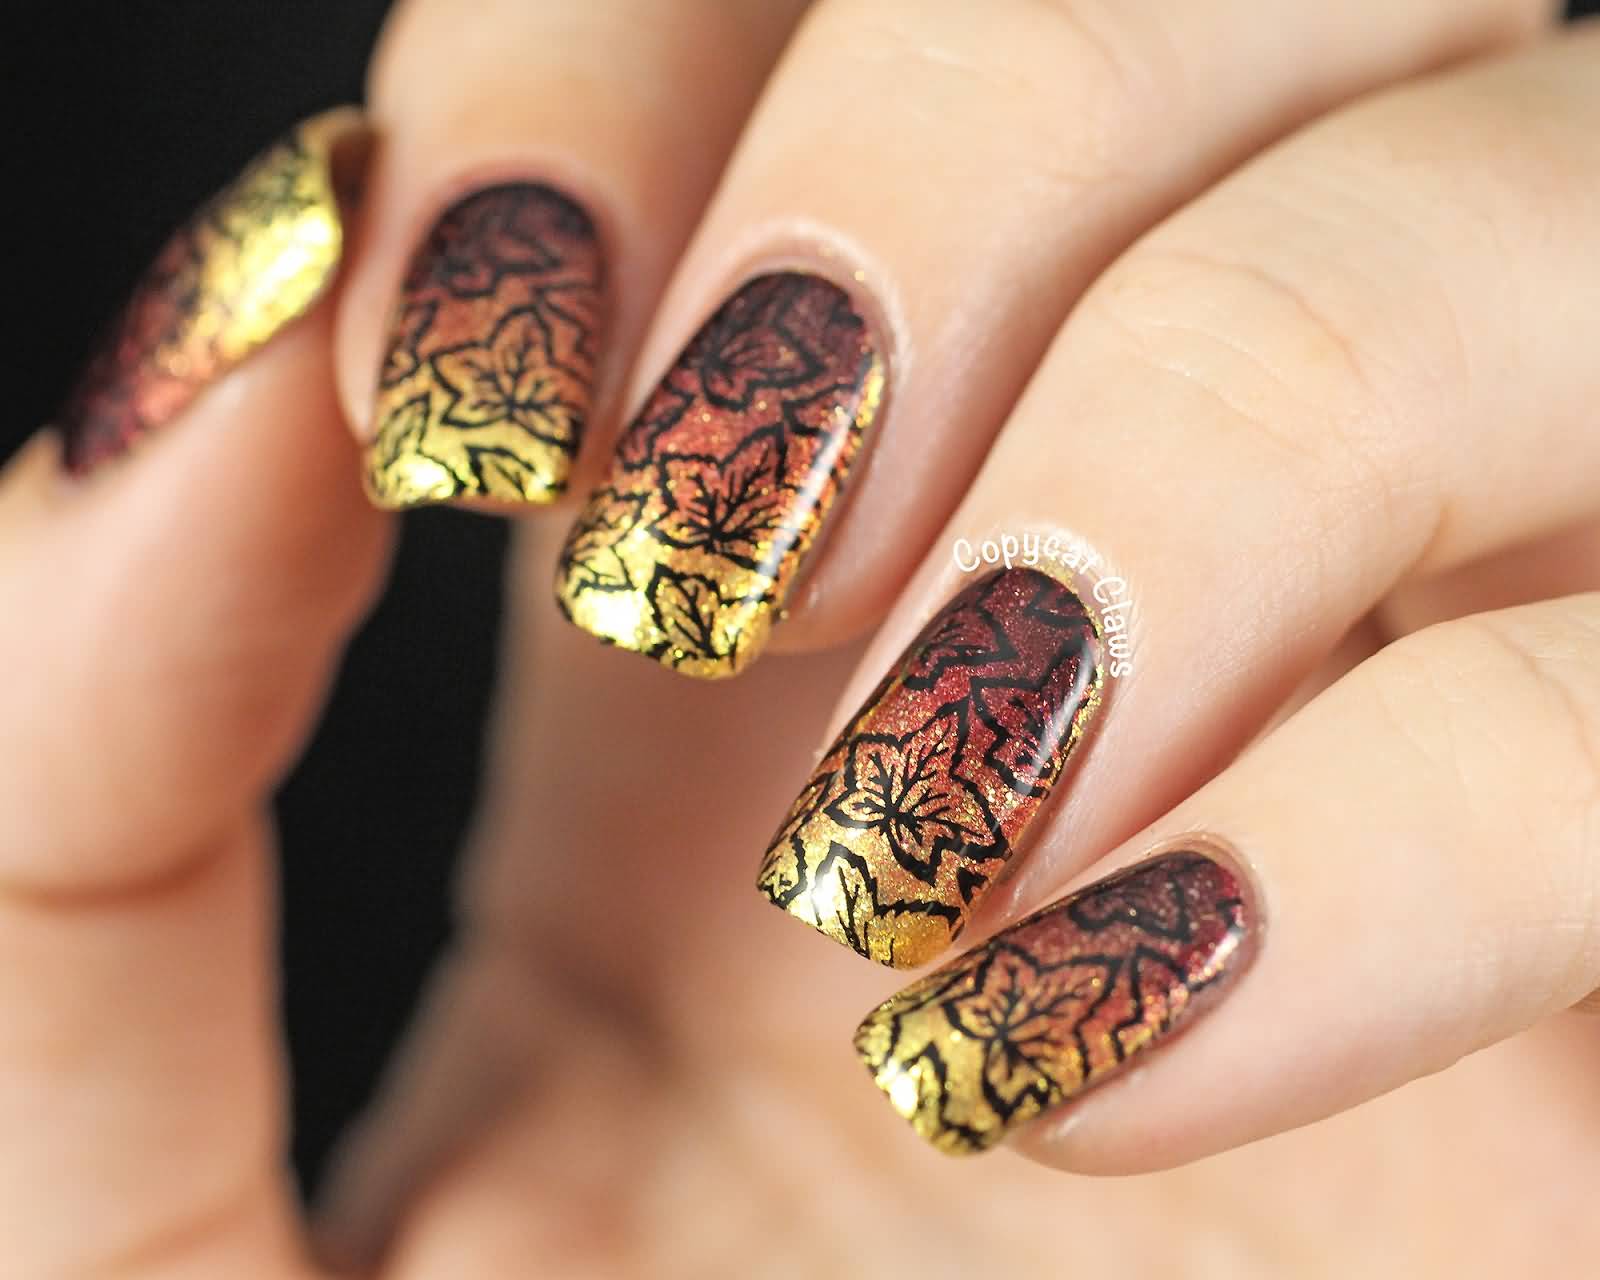 Gold And Brown Nails With Black Autumn Leaves Nail Art Design Idea